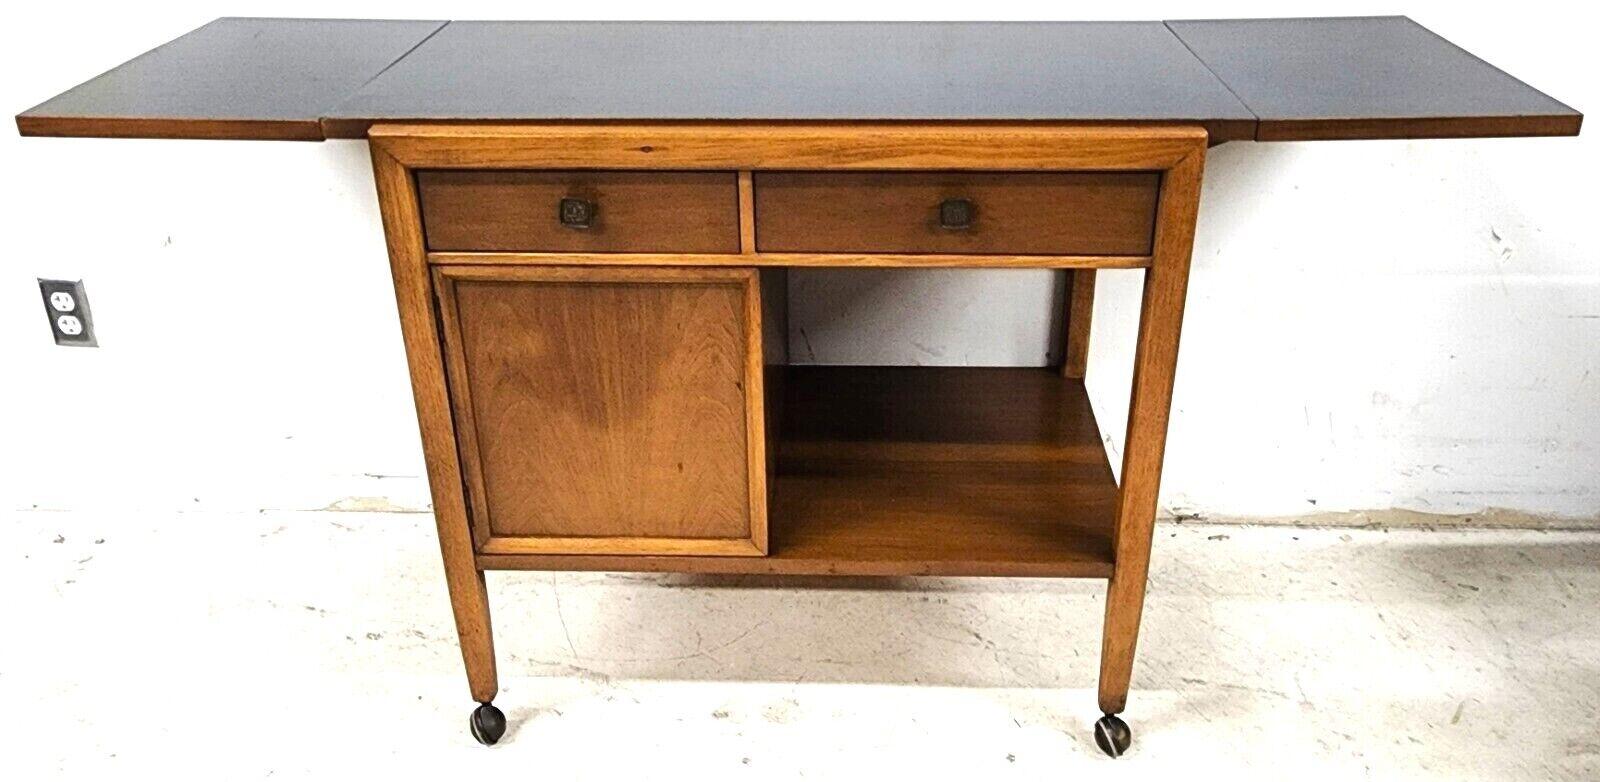 For FULL item description be sure to click on CONTINUE READING at the bottom of this listing.

Offering one of our recent palm beach estate fine furniture acquisitions of a vintage MCM walnut rolling sideboard buffet bar cart by